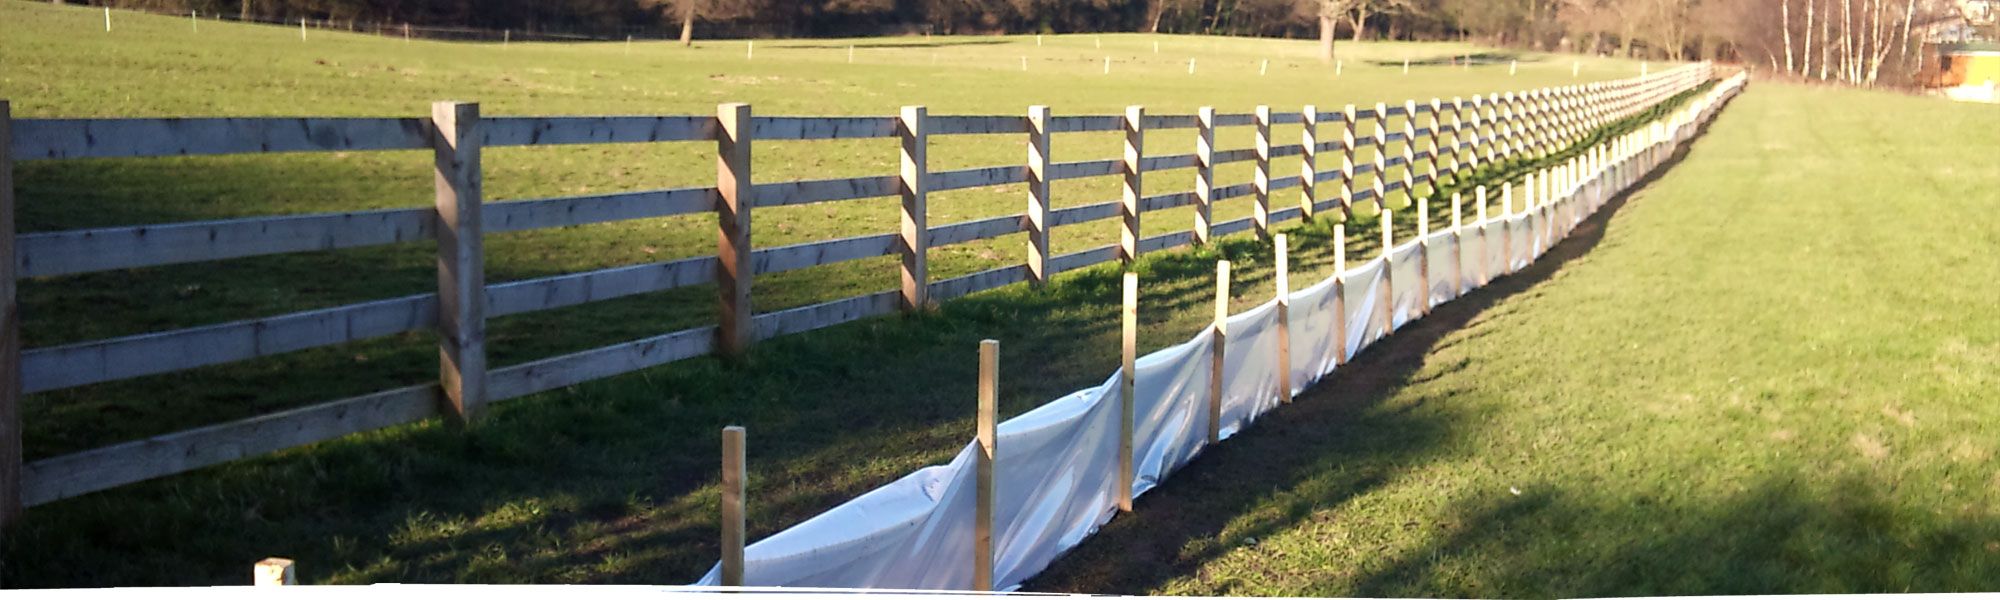 Fence for newt protection in North Wales